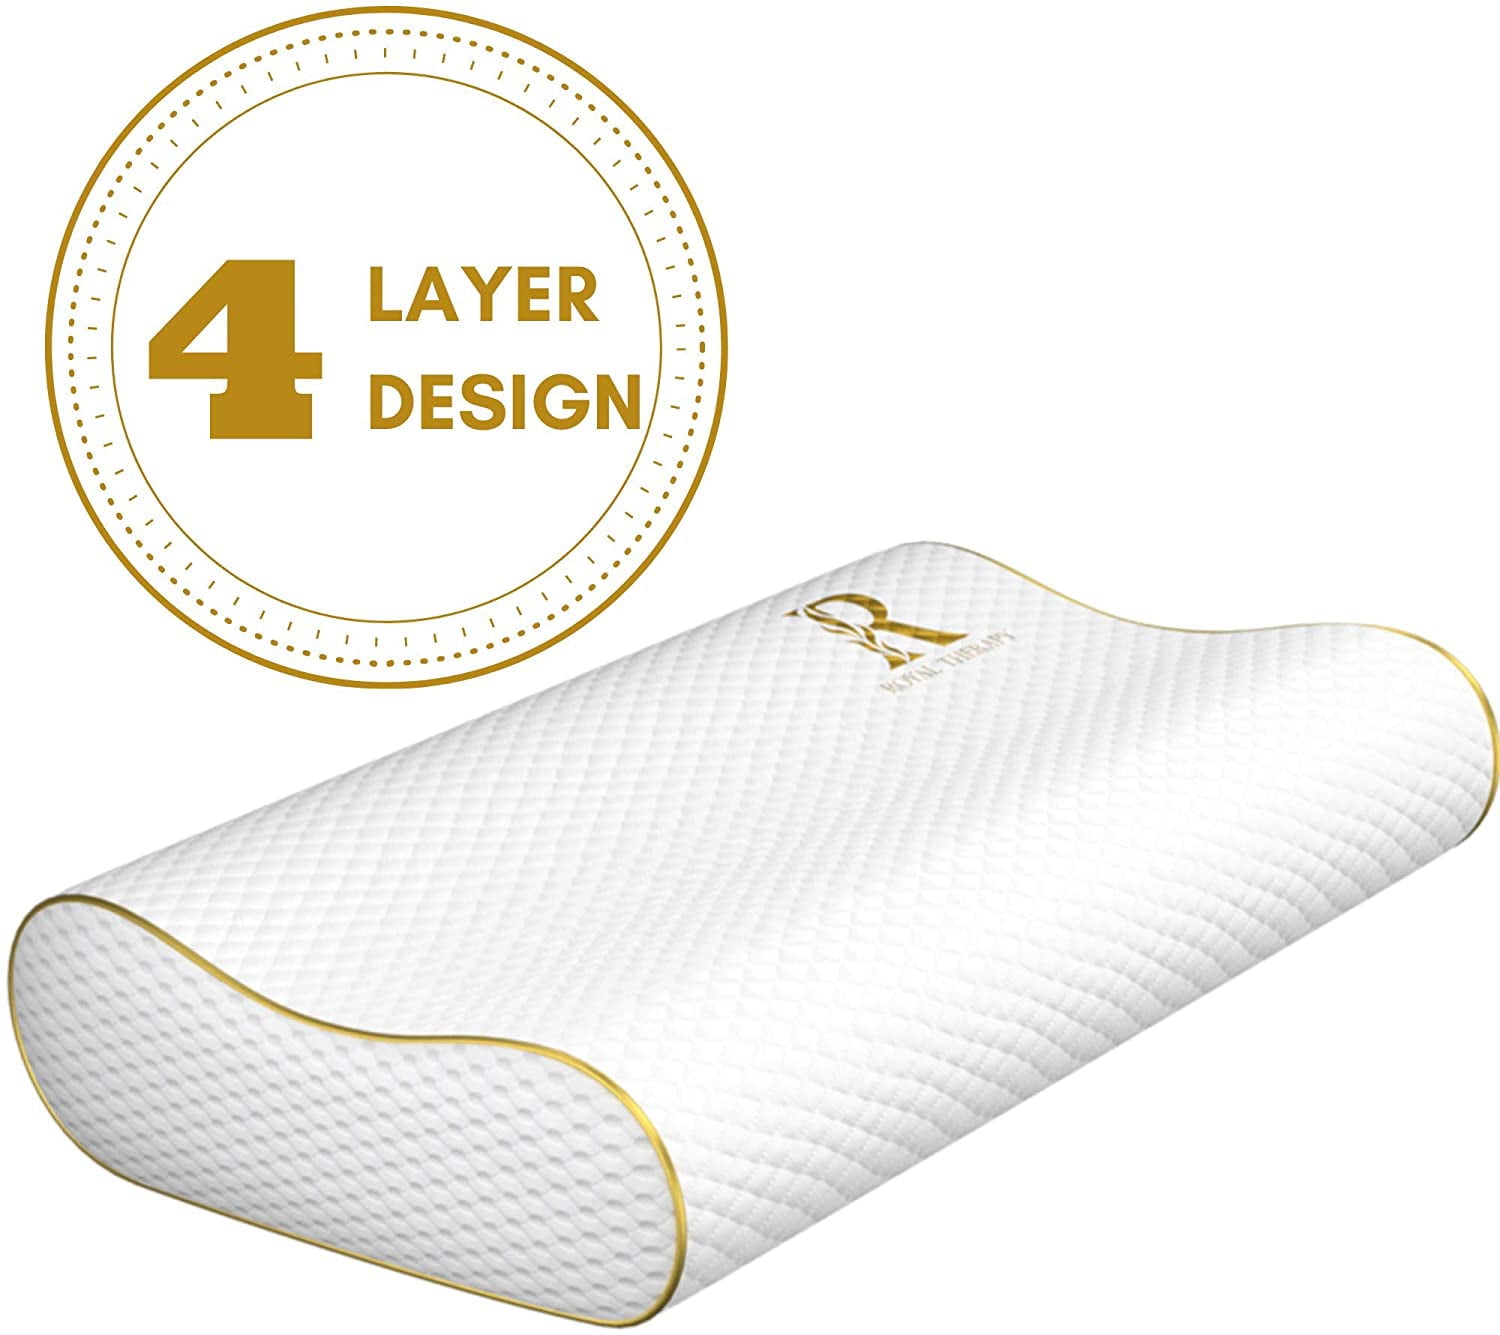 ROYAL THERAPY 4-Layer Queen Memory Foam Pillow, Bed Pillow for Neck & Shoulder, Support for Back, Stomach, Side Sleepers, Orthopedic Contour Pillow